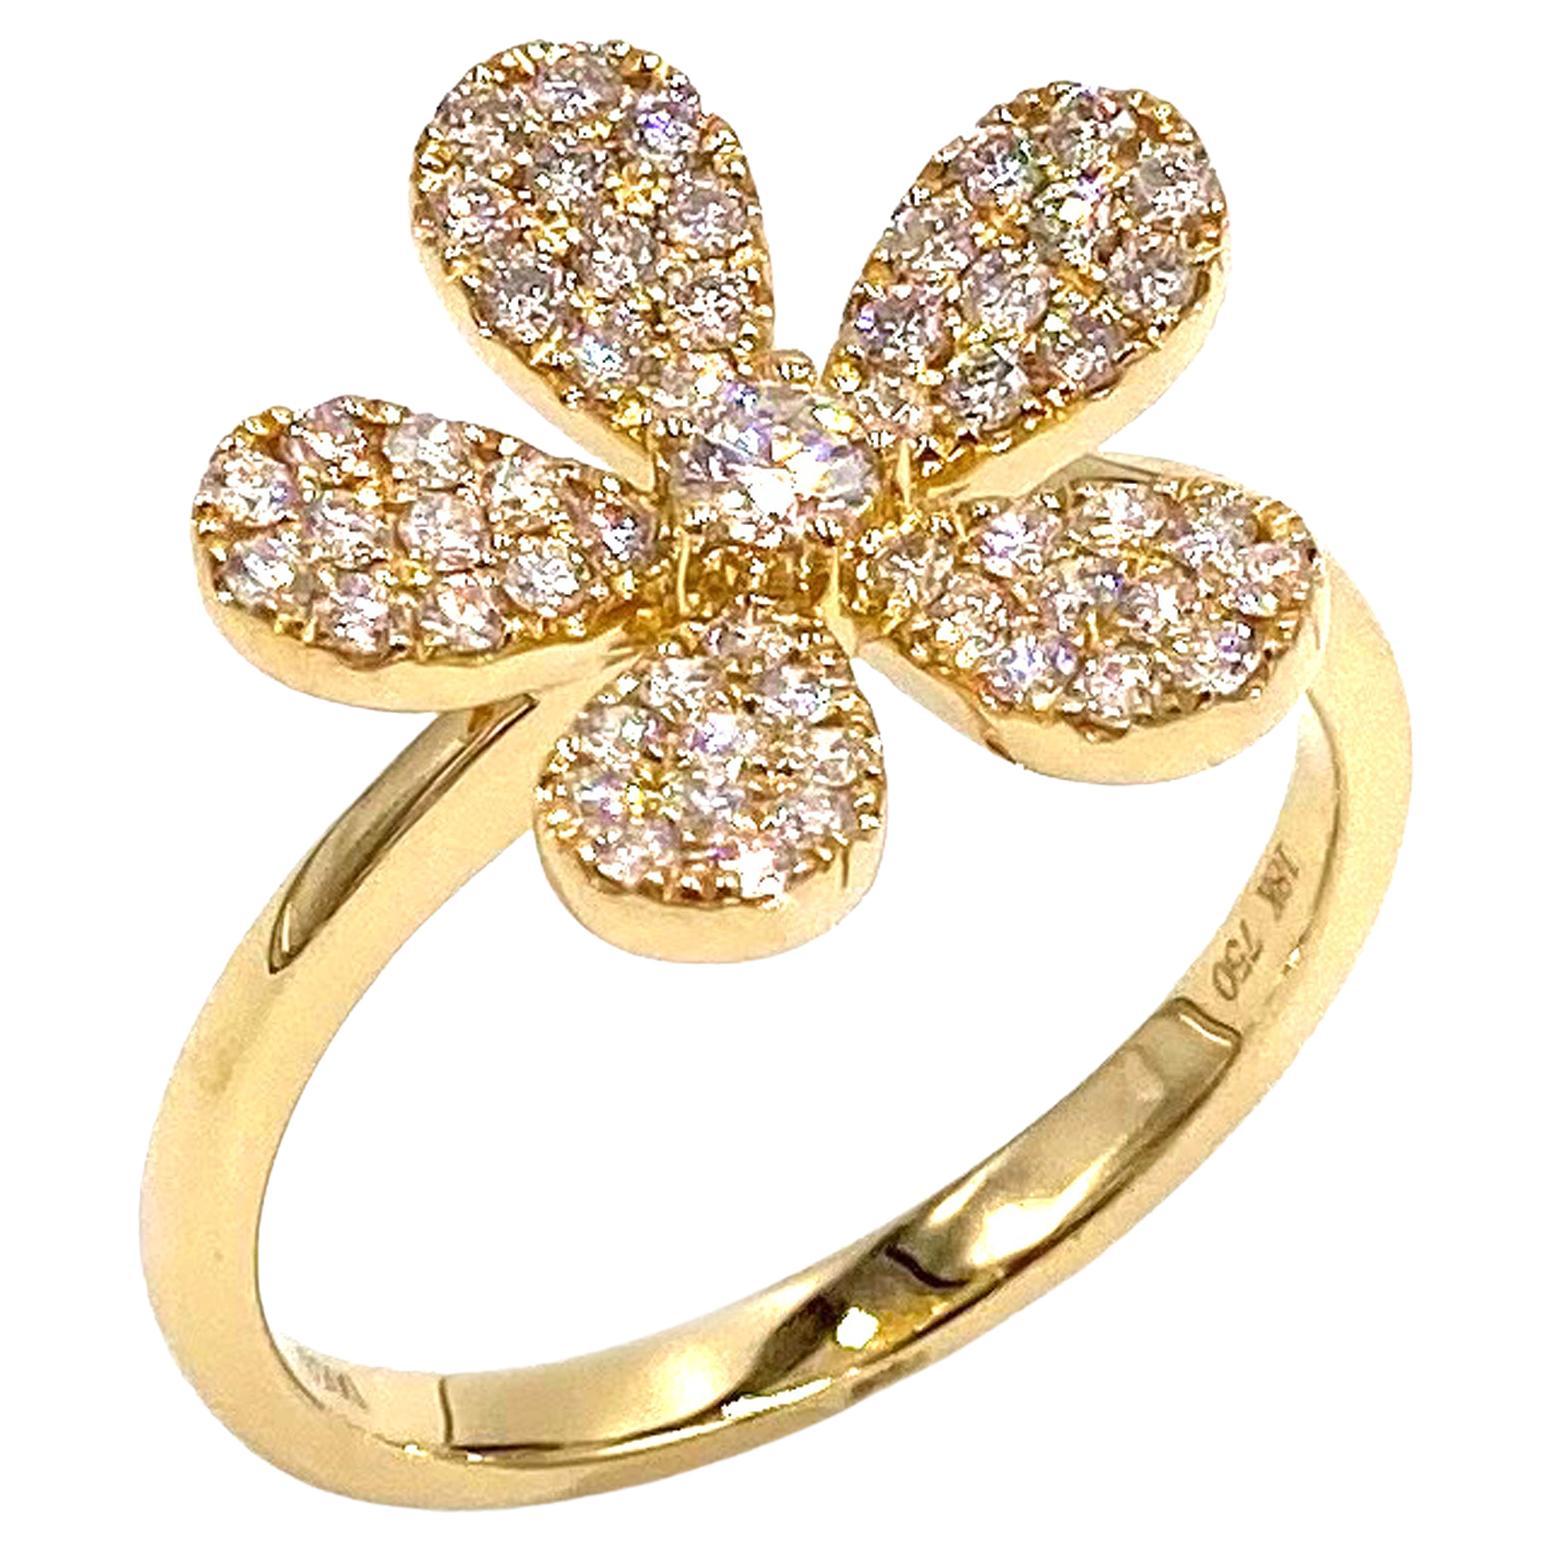 Daisy Ring with Diamonds in 18k Yellow Gold